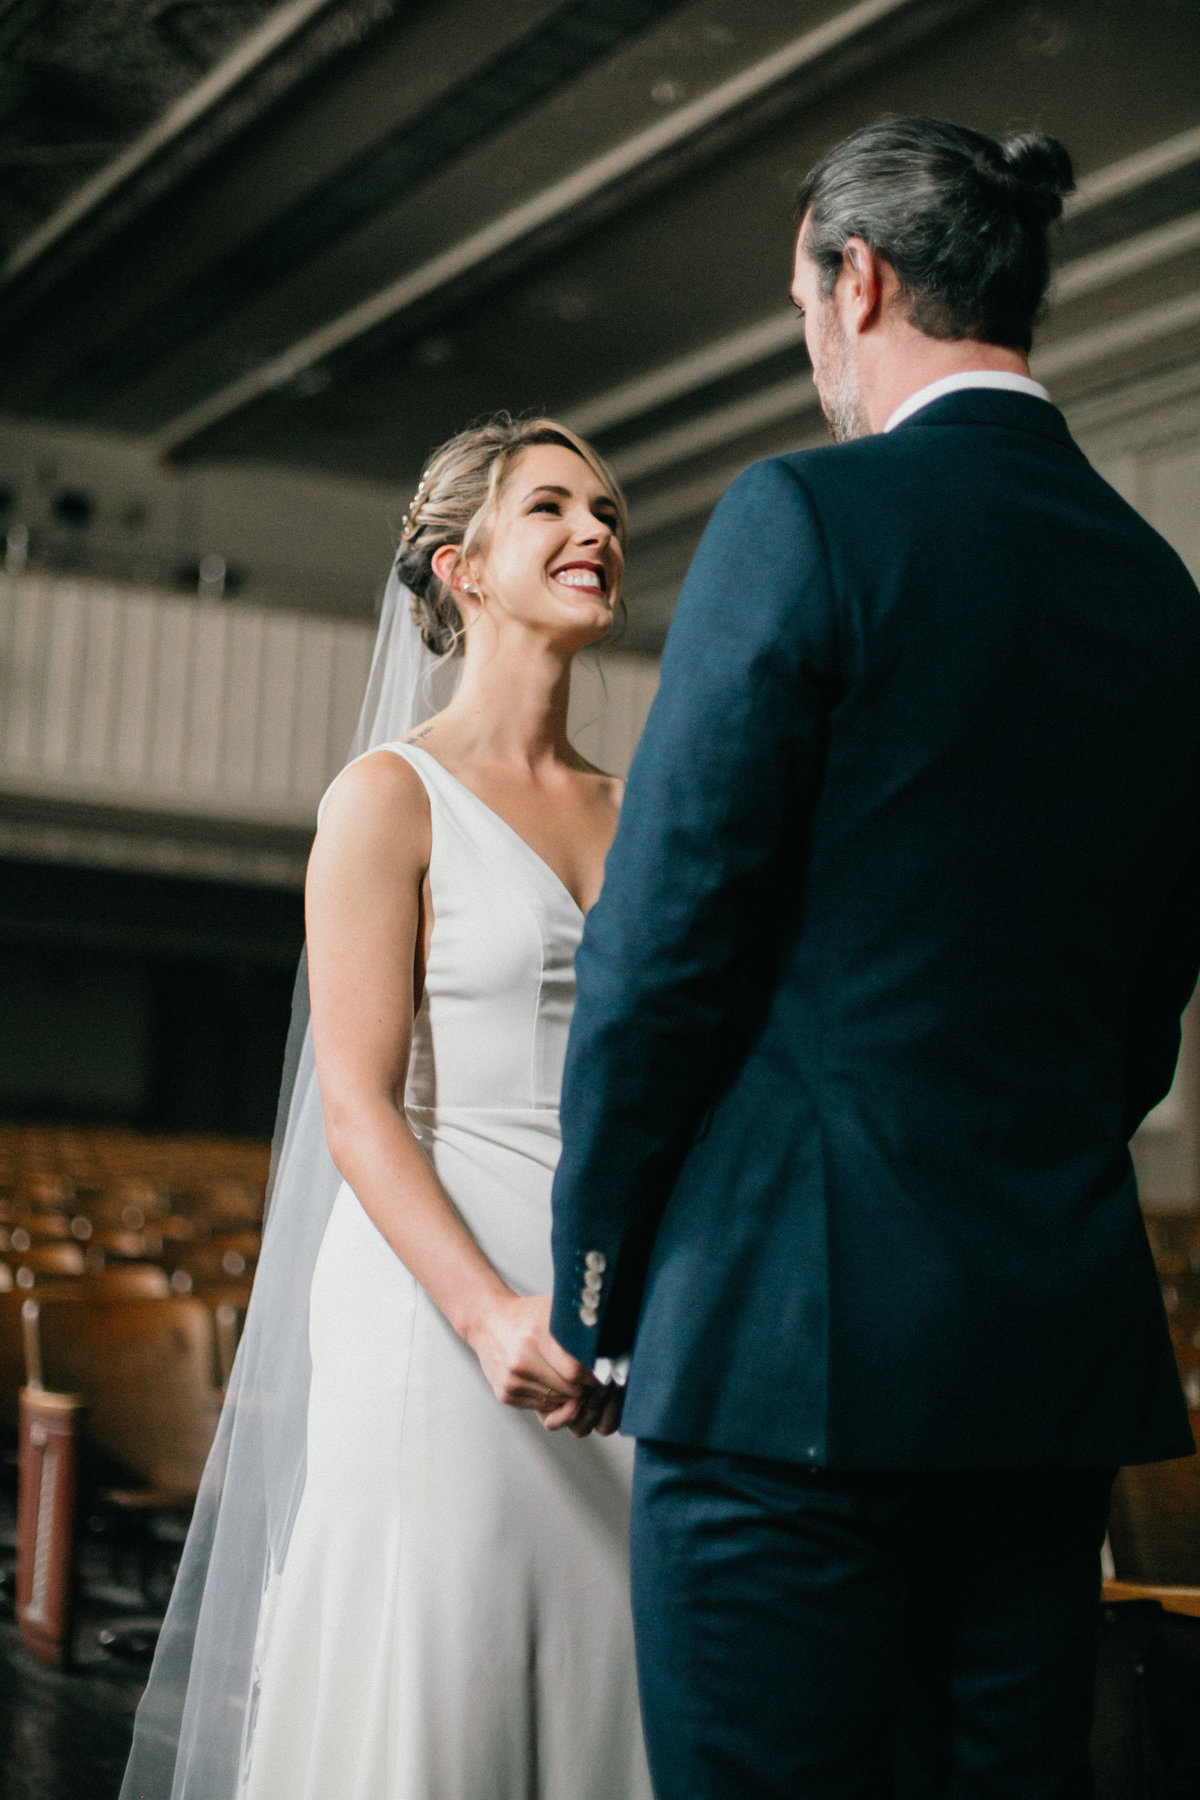 Bride and groom photographed together in this unique and  industrial Philadelphia wedding venue.